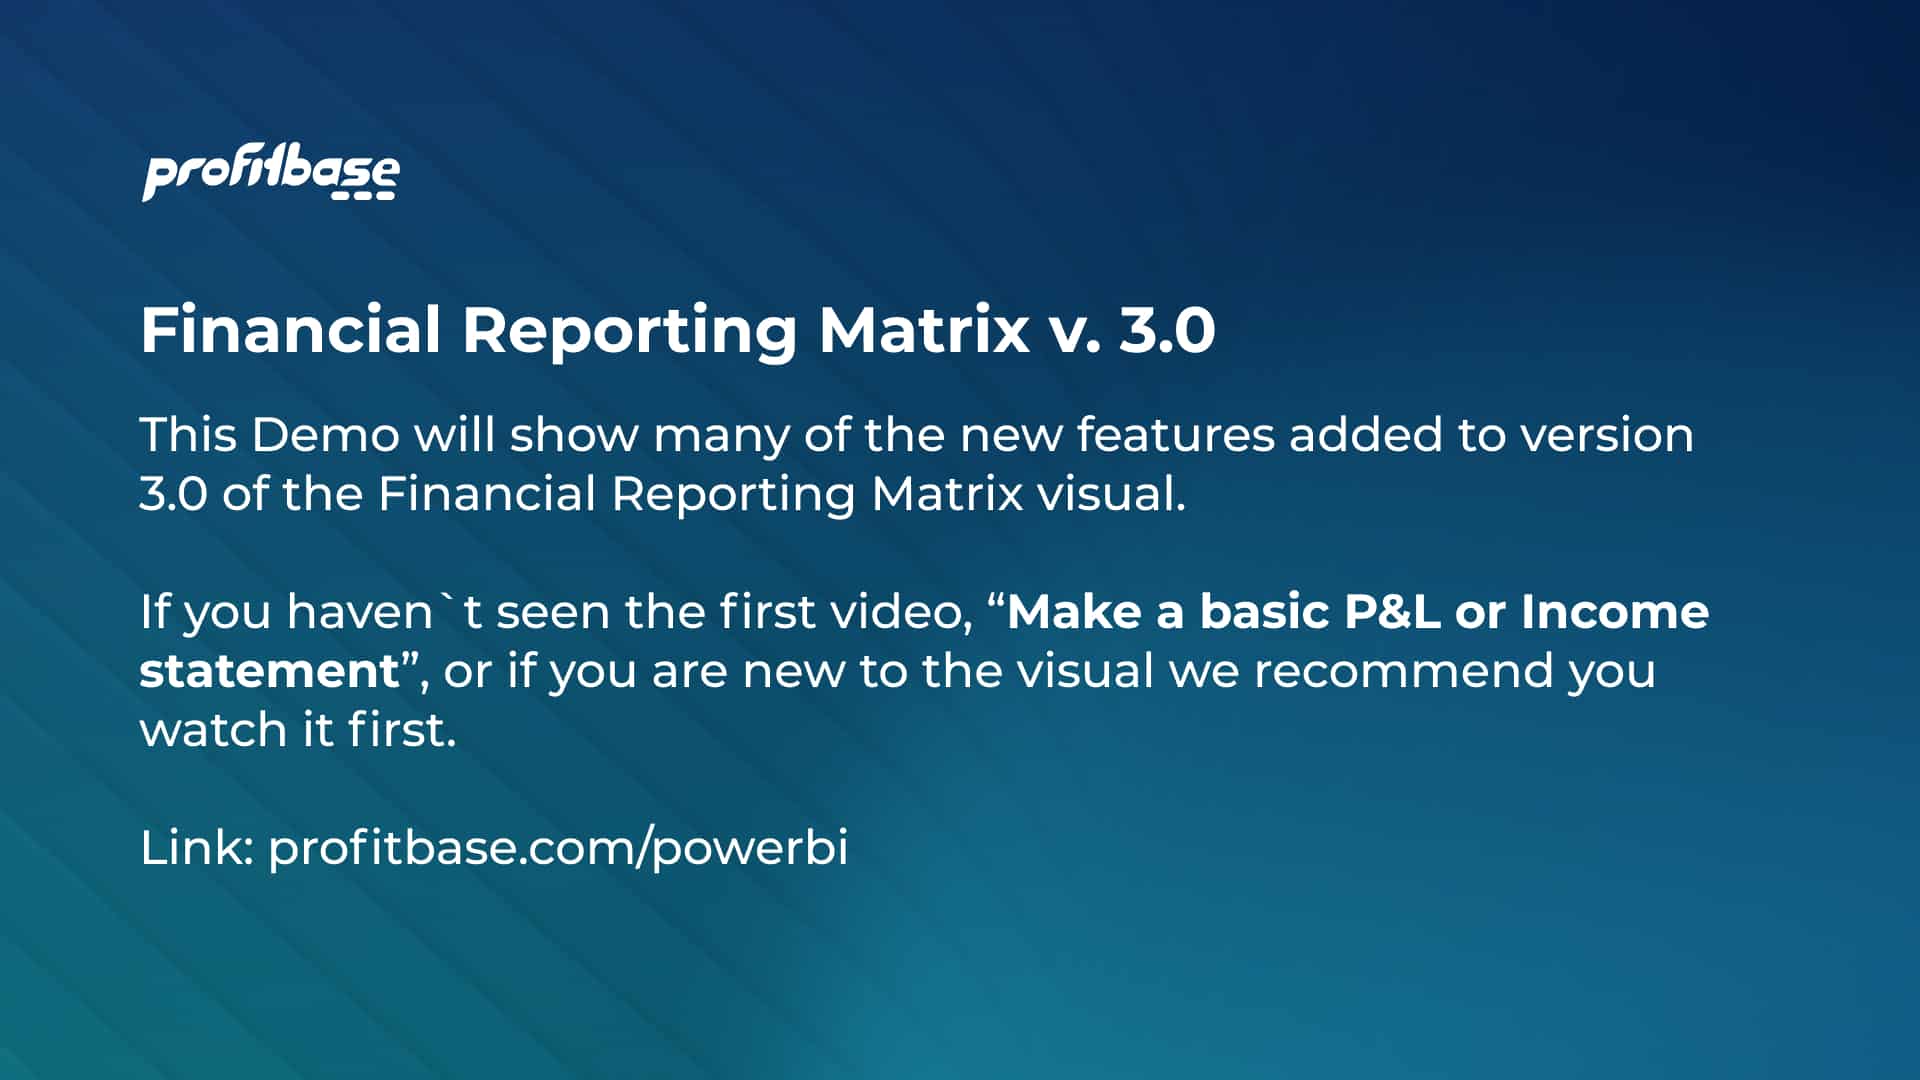 Financial Reporting Matrix - new features